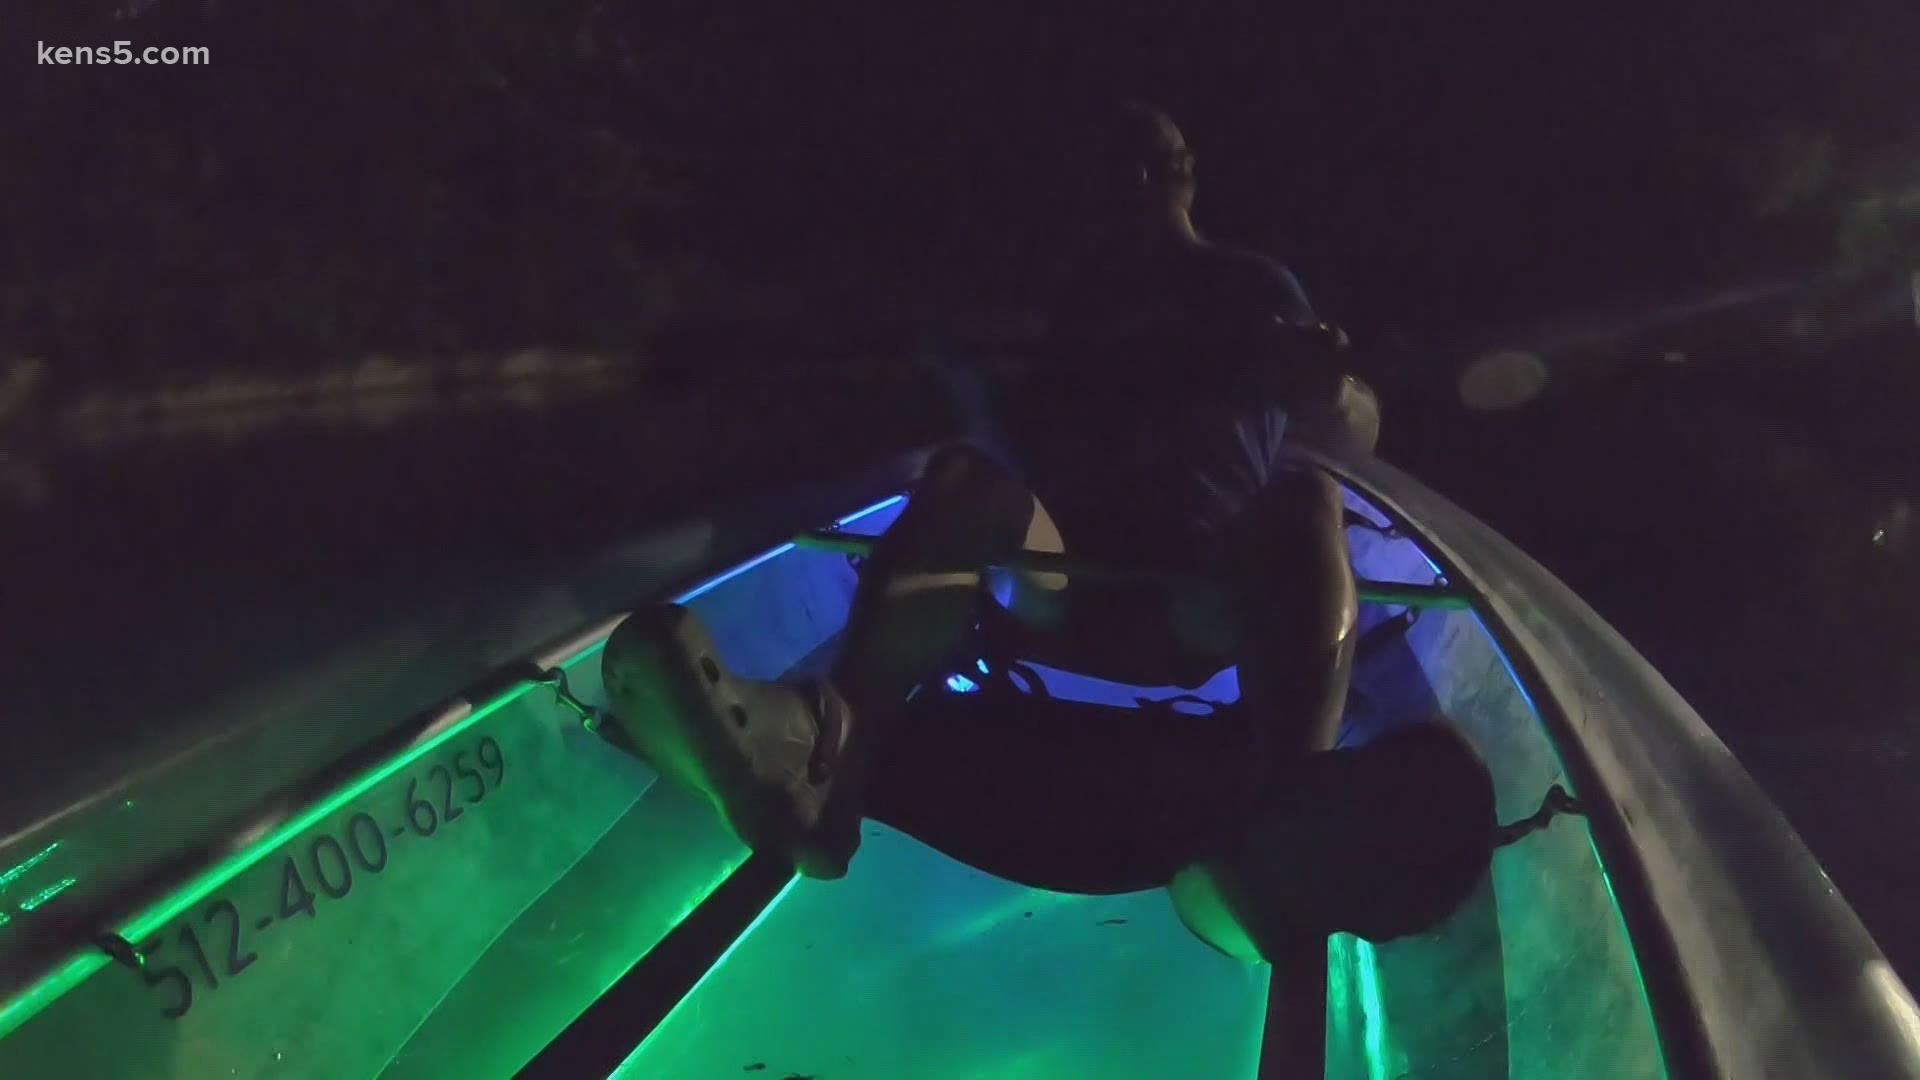 On this week's Texas Outdoors, we're checking out nighttime kayaking in San Marcos.